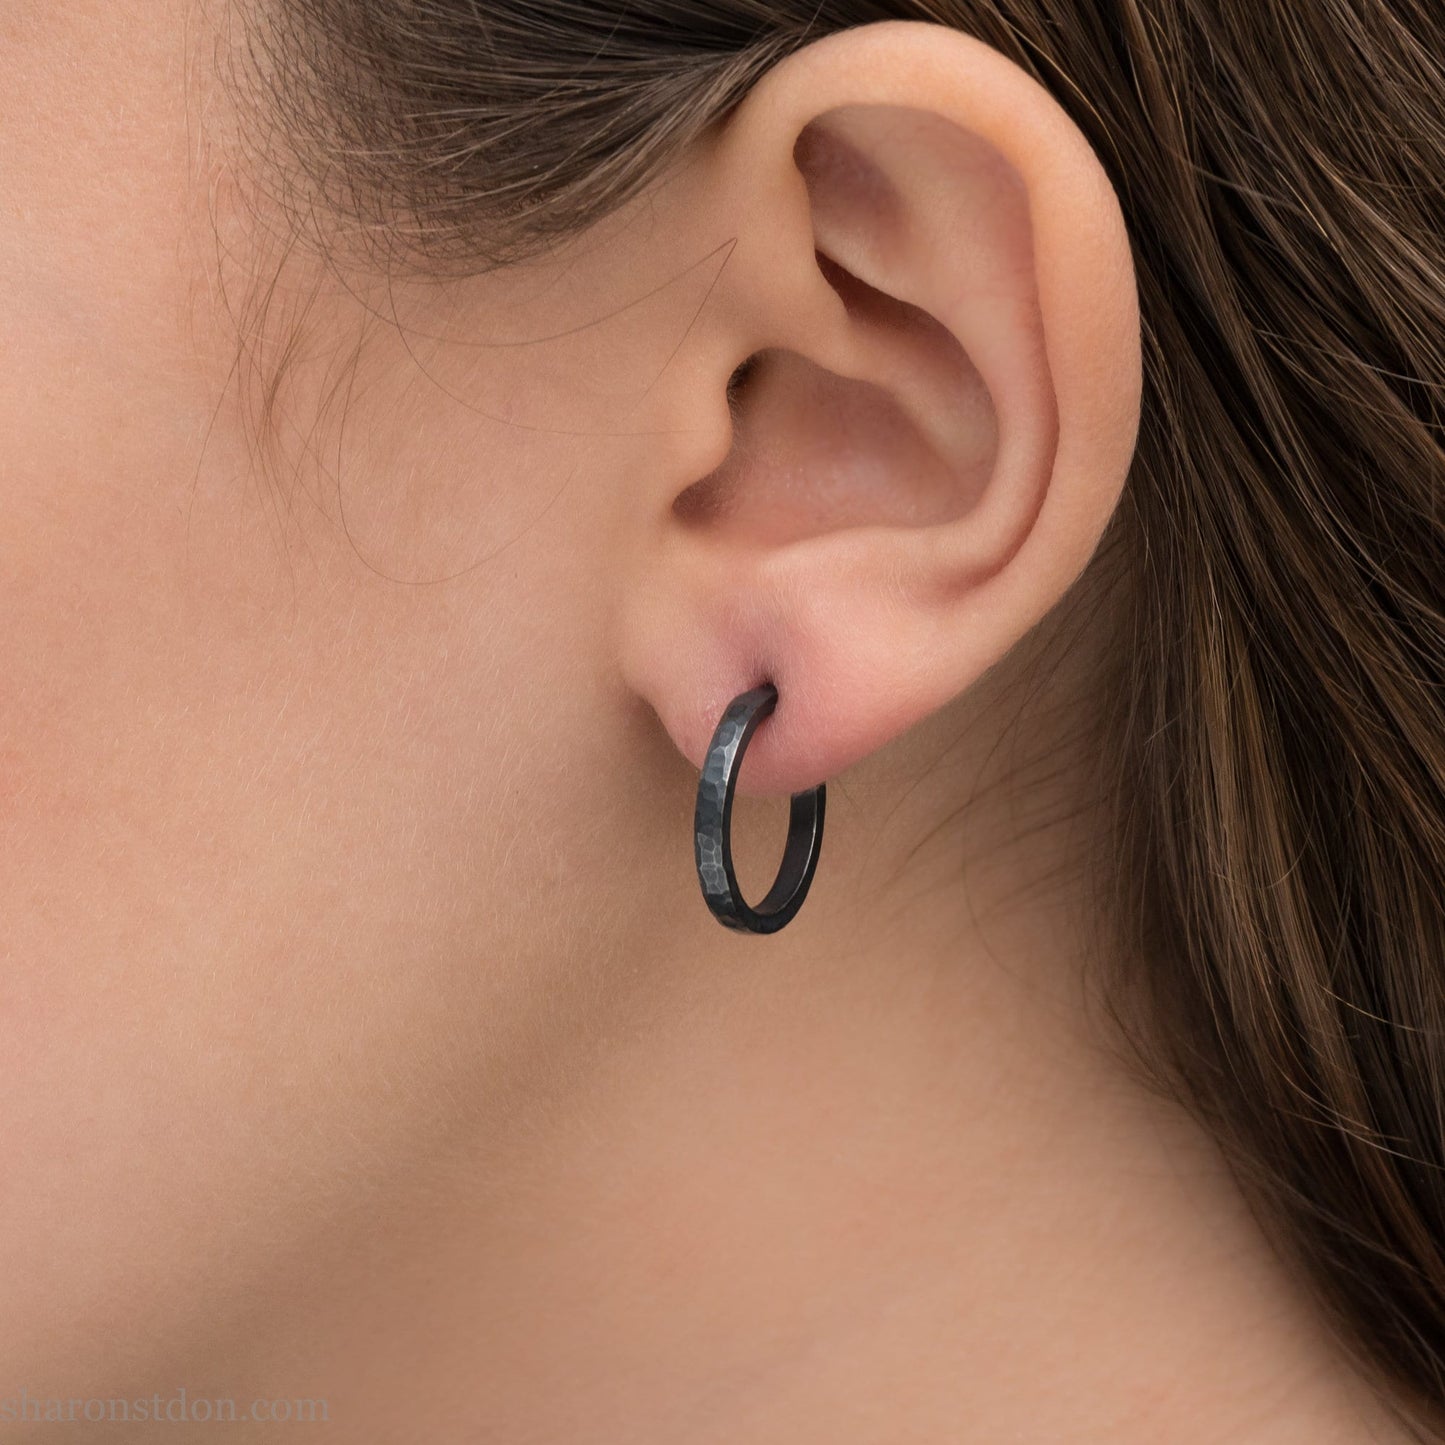 18mm x 2mm oxidized black 925 sterling silver hoop earrings for men. Hammered texture, matte, flat black handmade by Sharon SaintDon in North America.